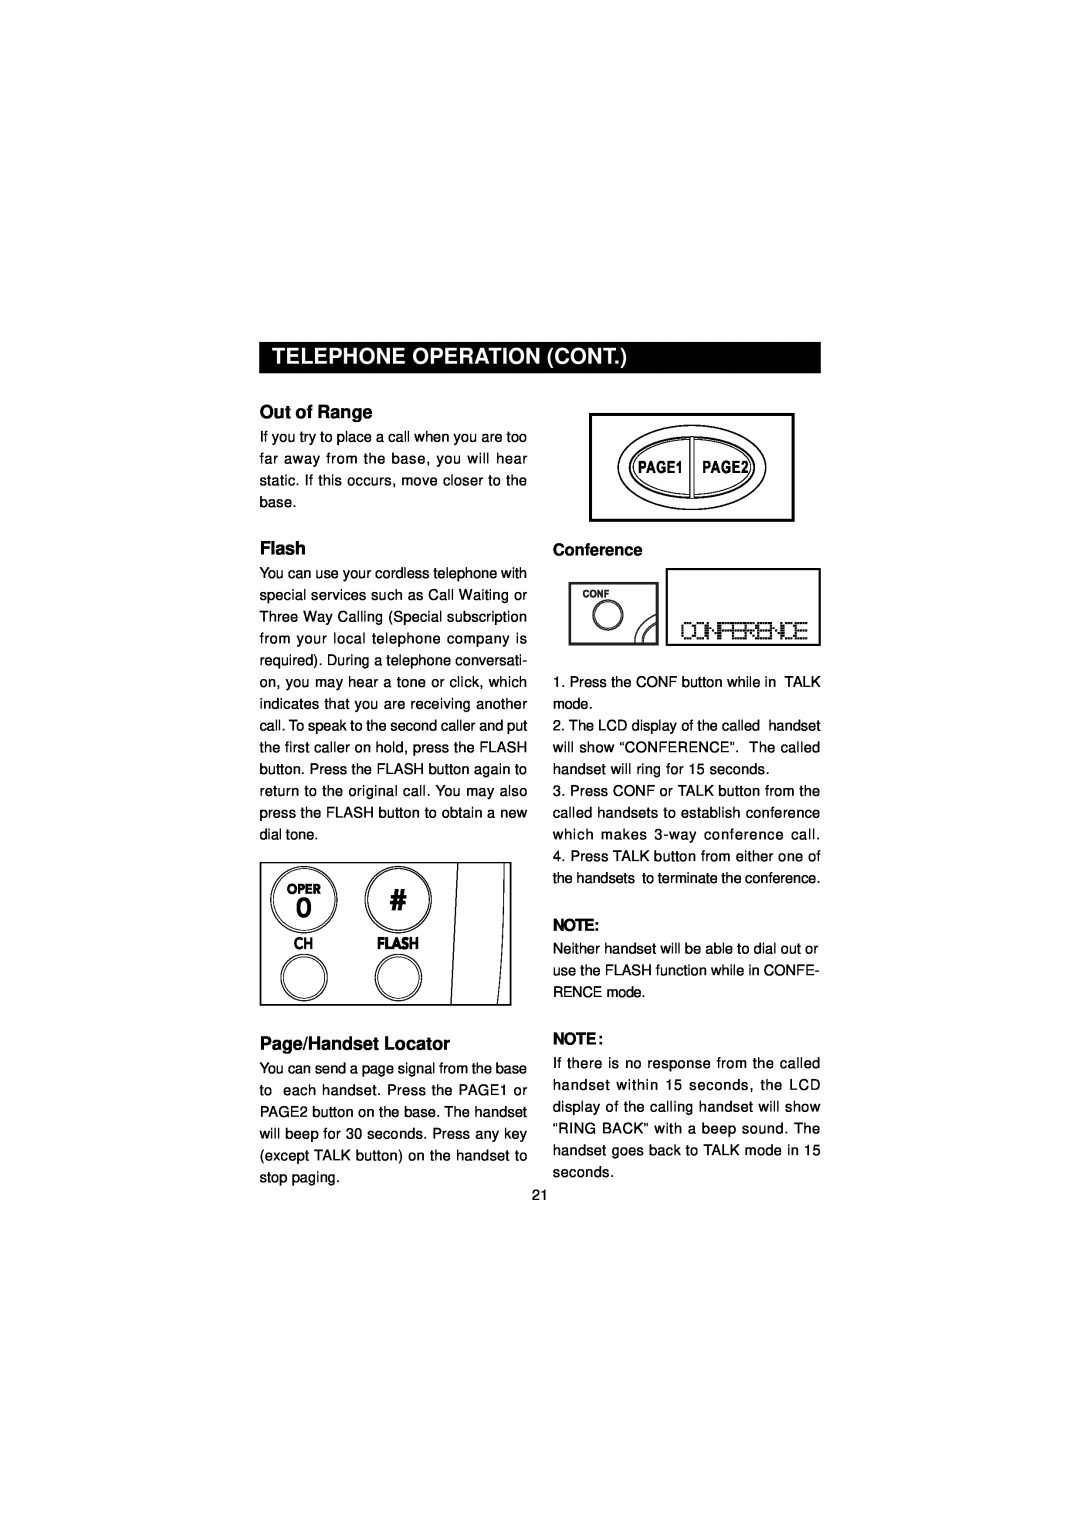 Southwestern Bell GH3210 owner manual Out of Range, Flash, Conference, Page/Handset Locator, Telephone Operation Cont 